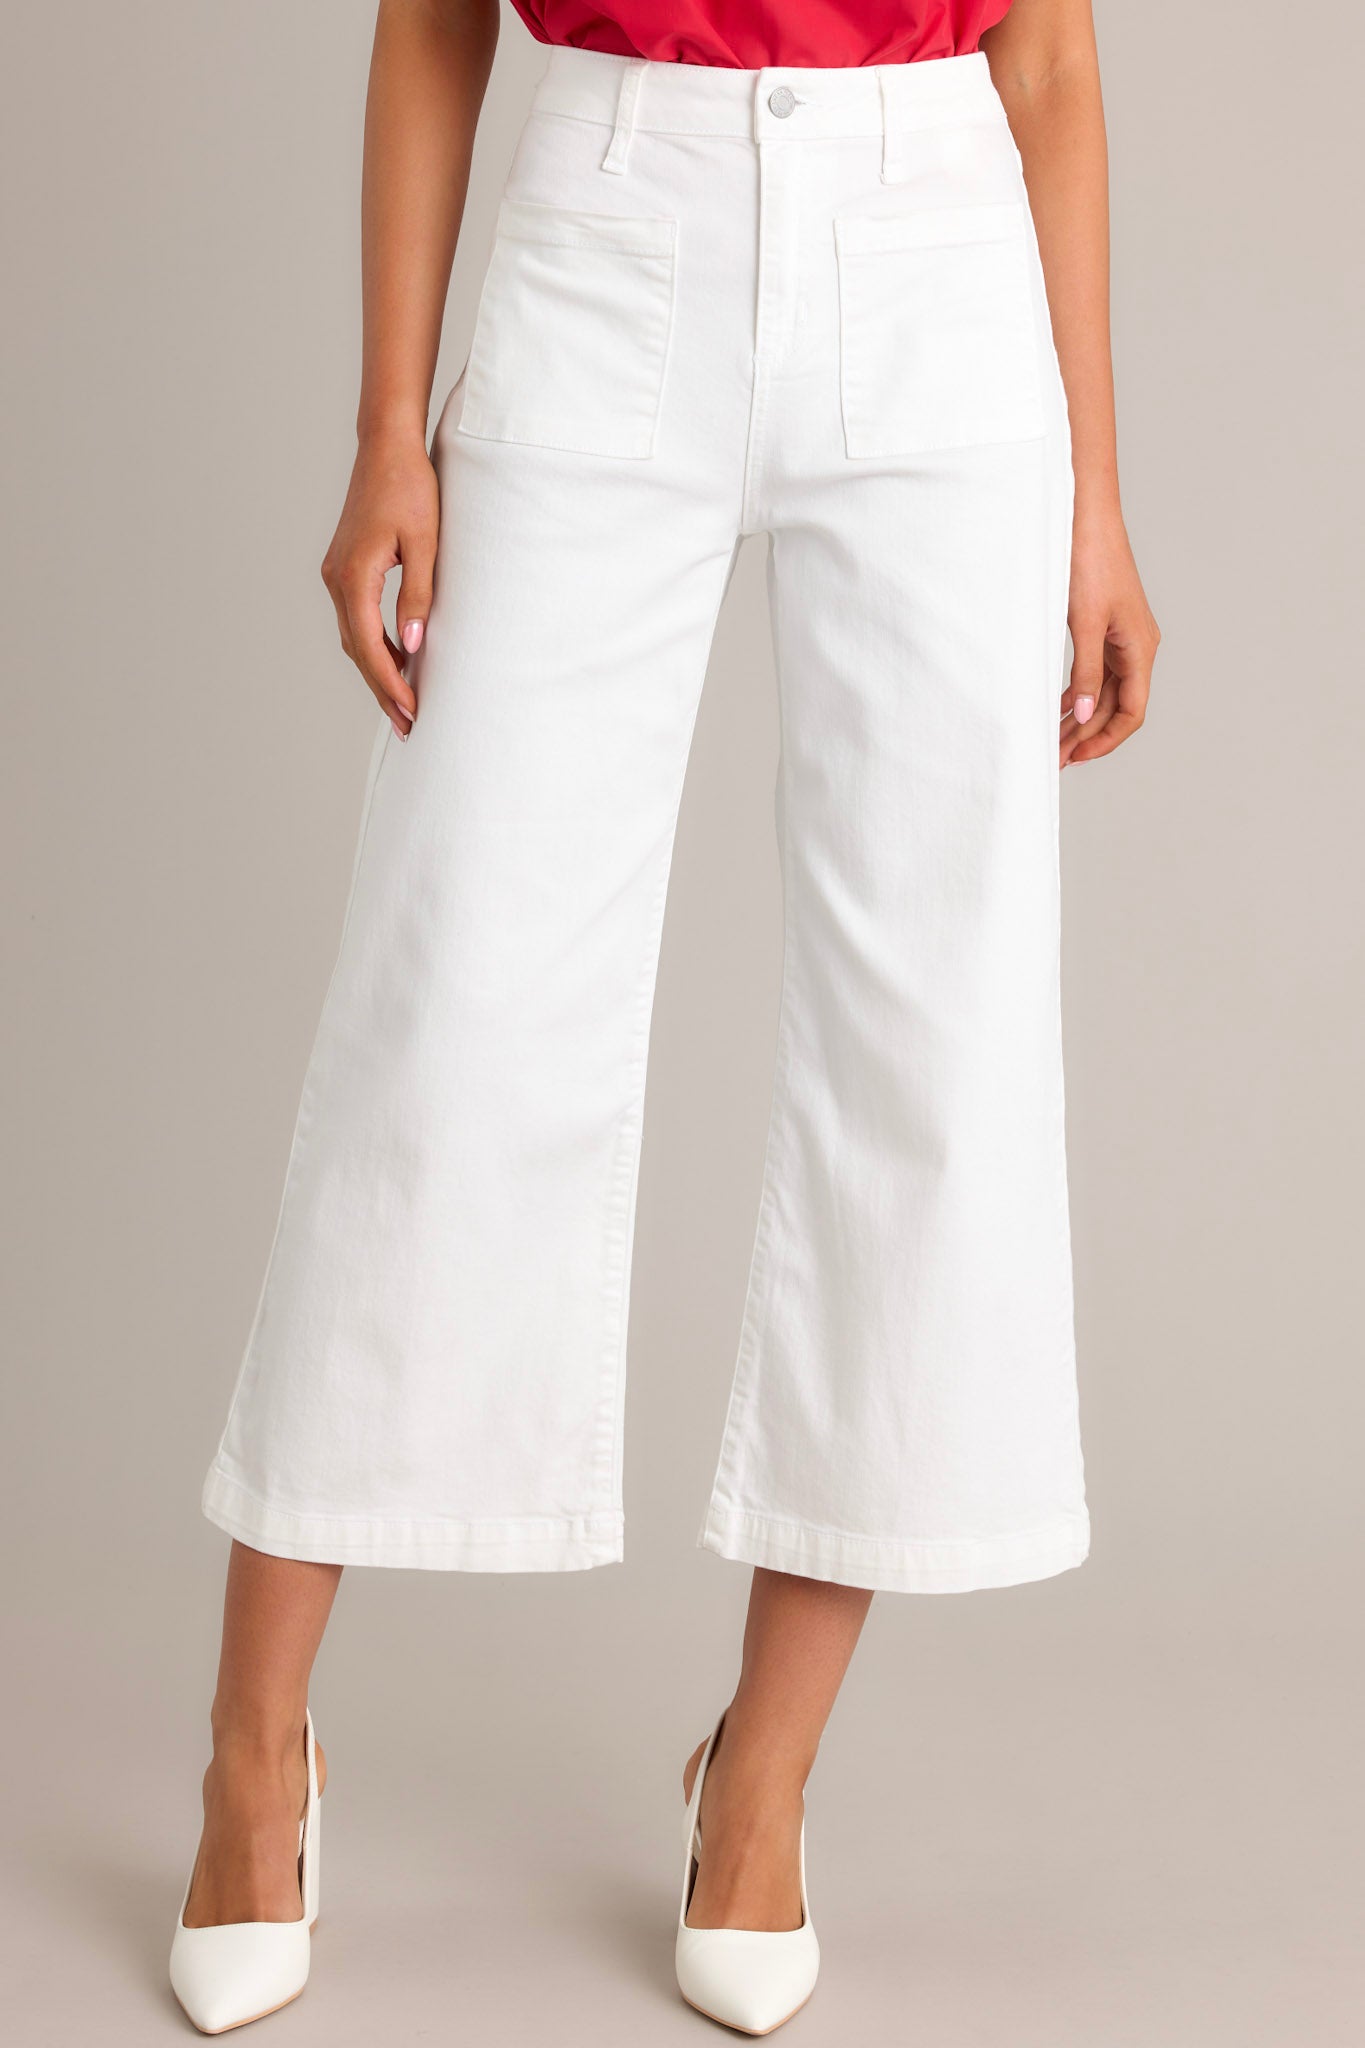 Front angled view of white jeans featuring a high waisted design, a button & zipper closure, belt loops, functional front & back pockets, a cropped hemline, and a flared leg